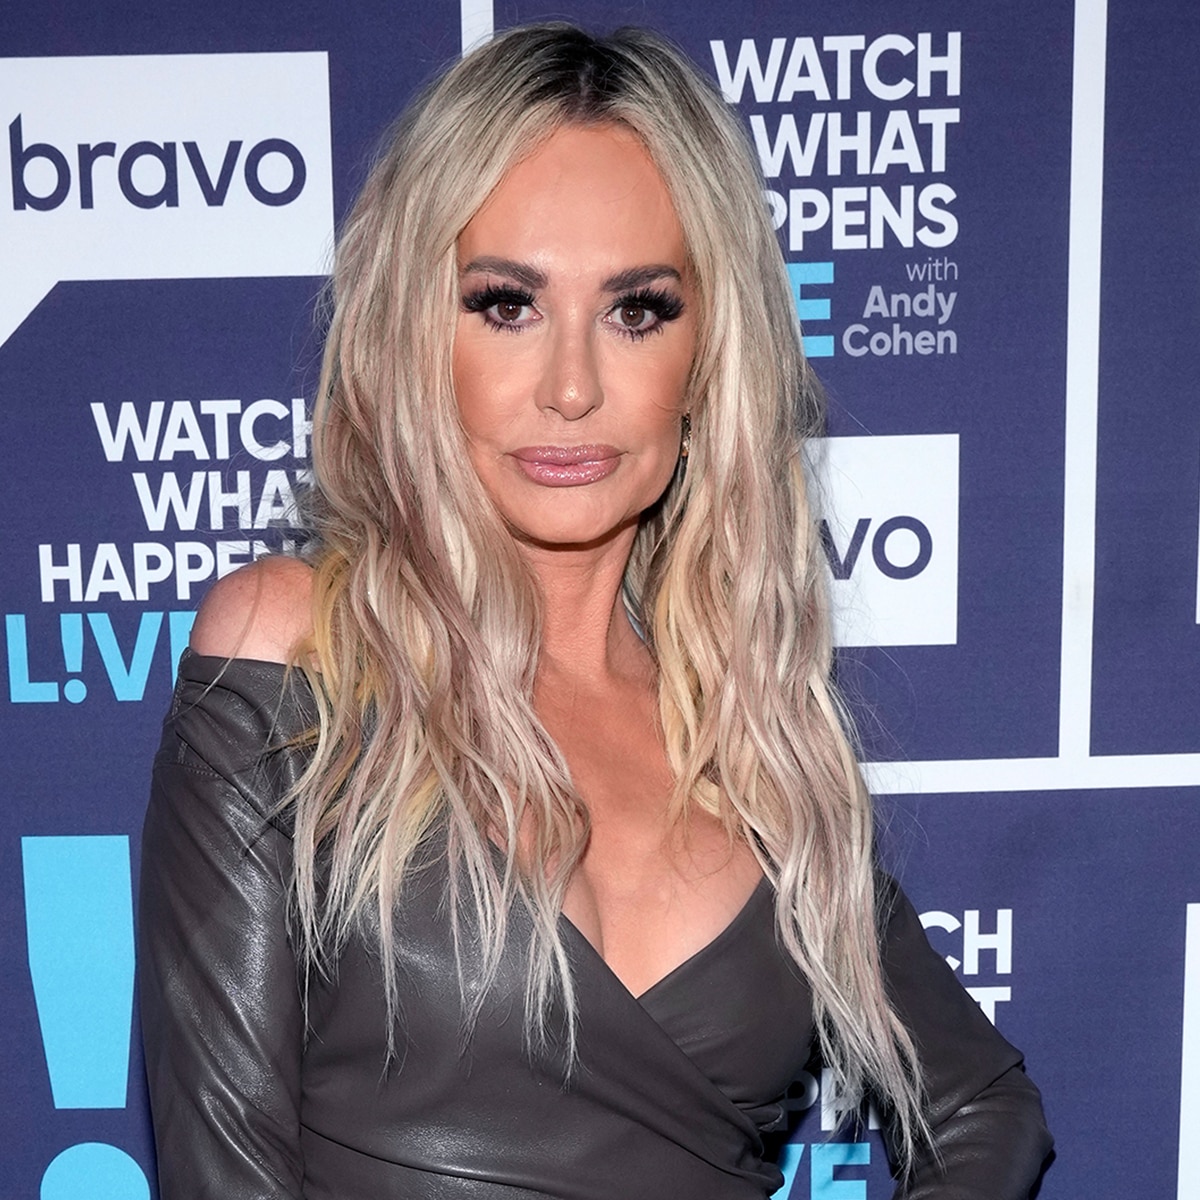 Taylor Armstrong Is Joining Real Housewives of Orange County